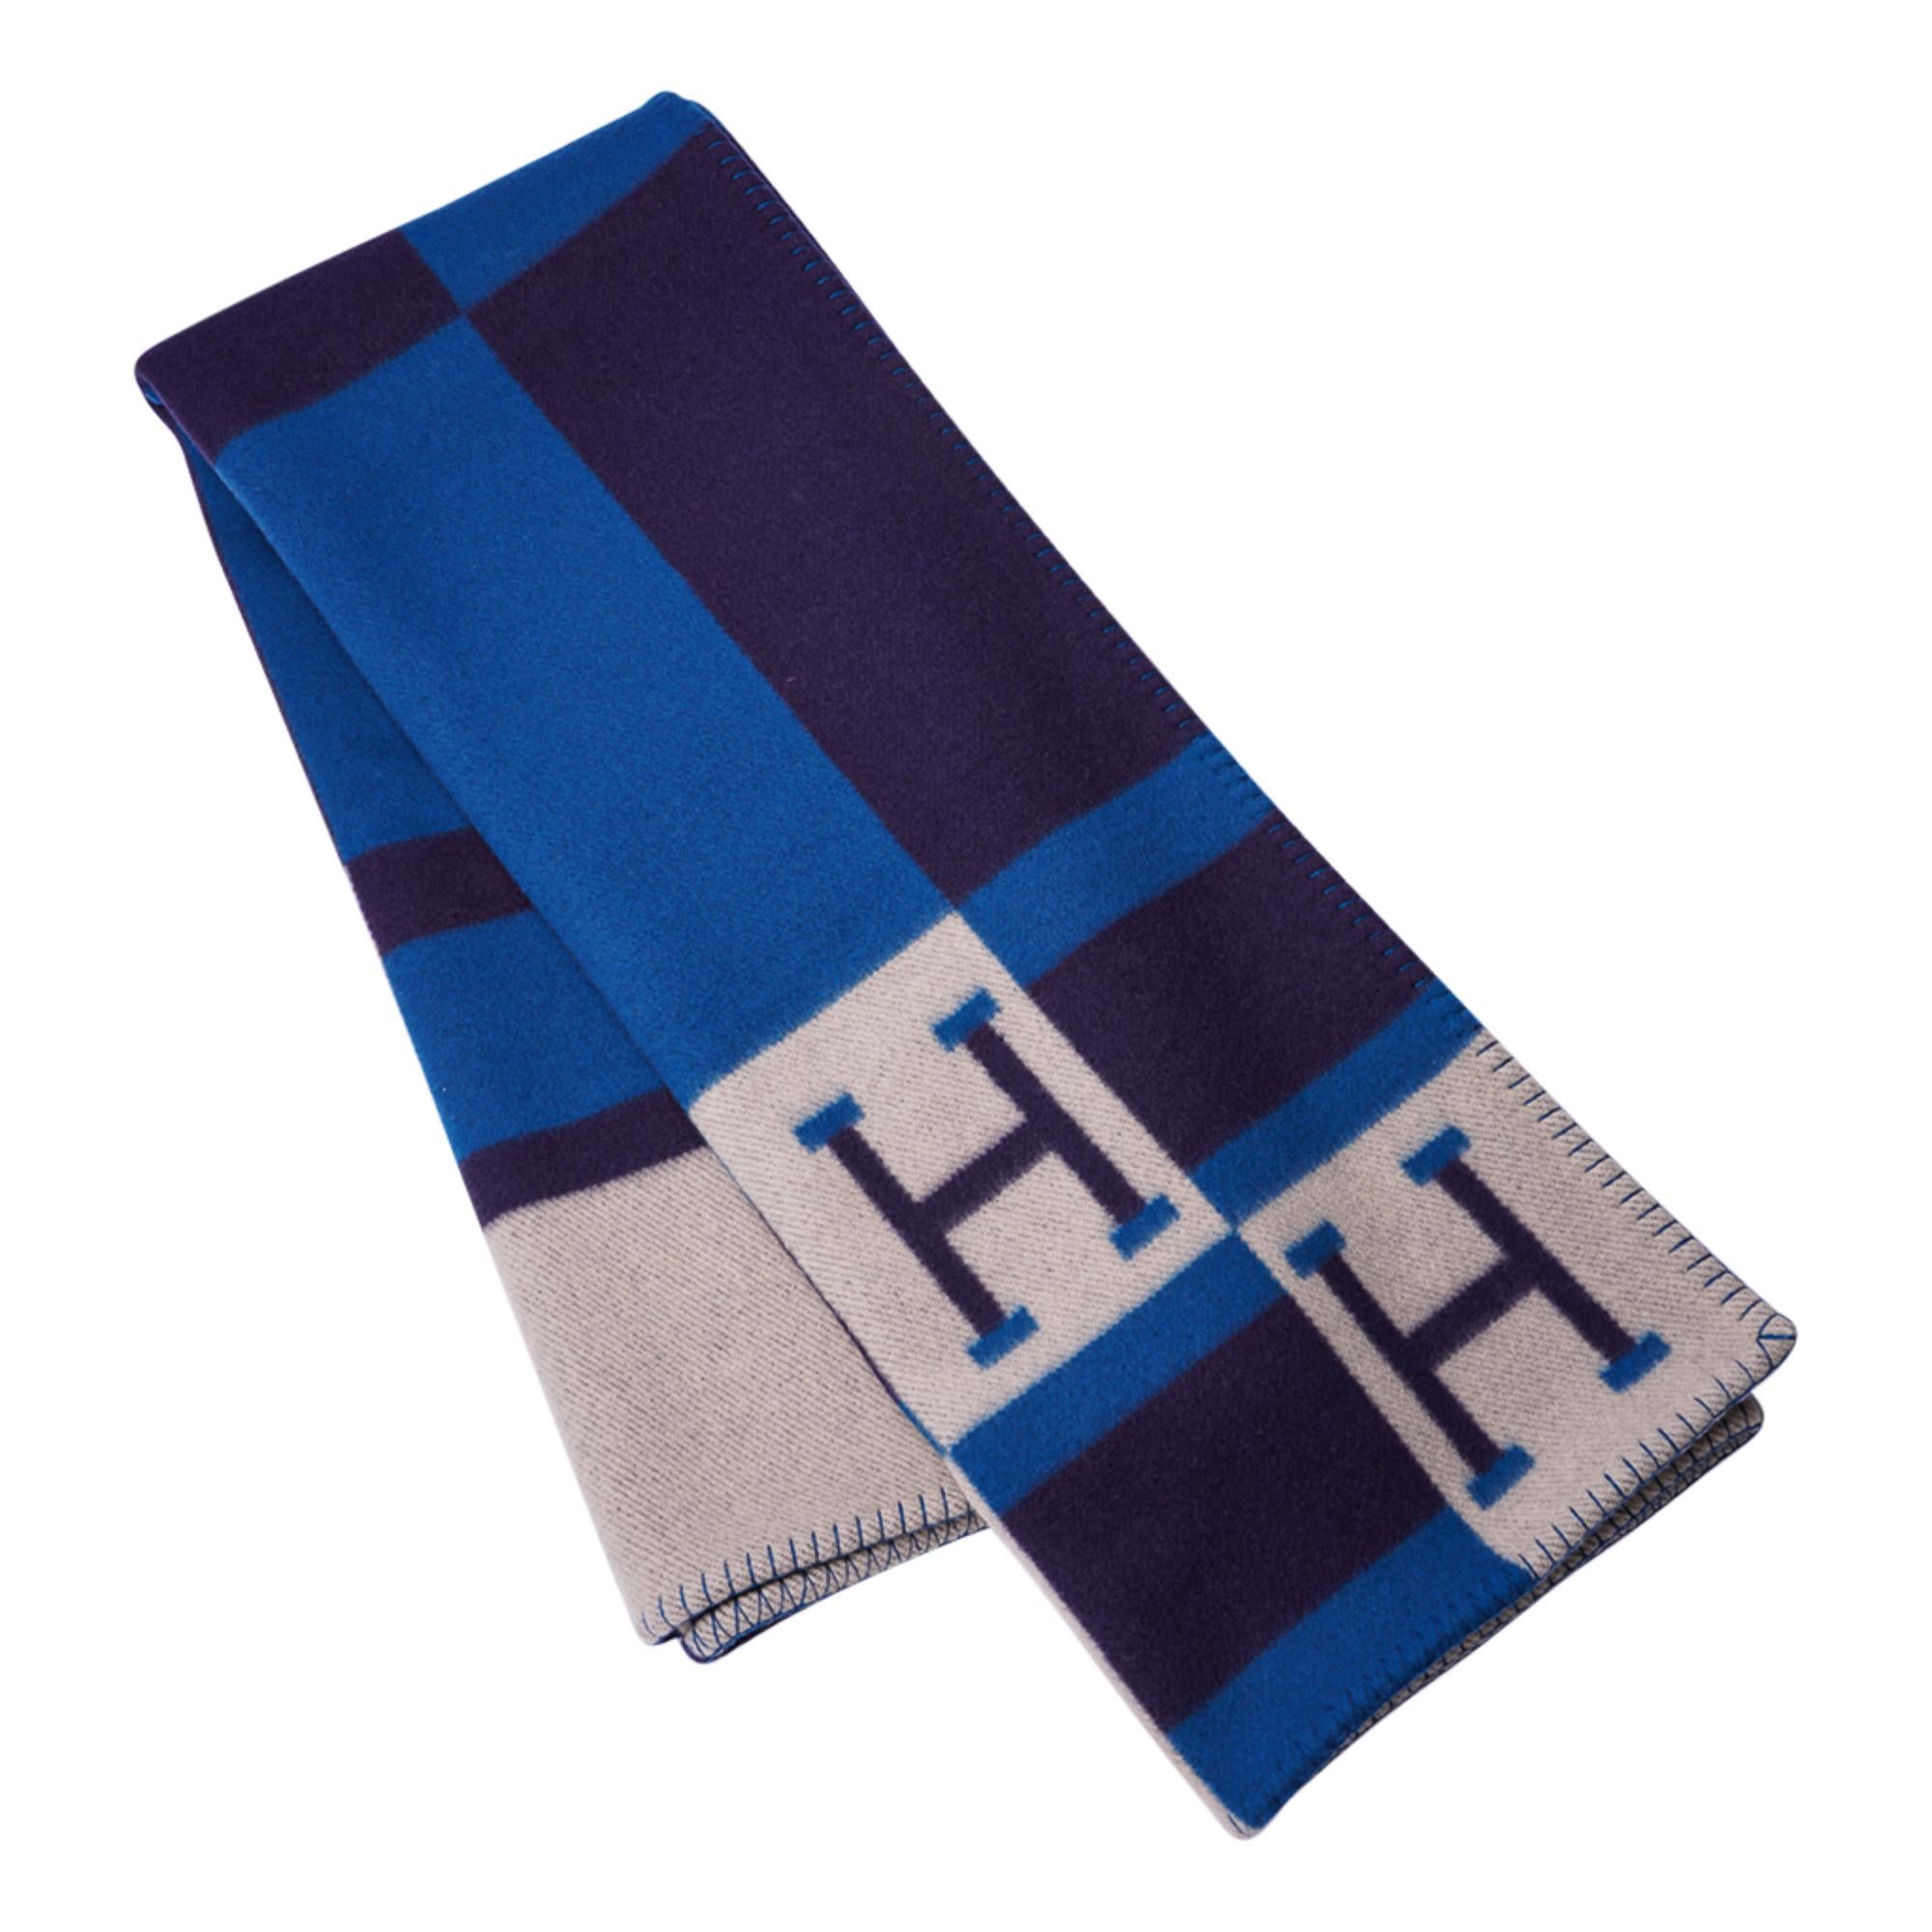 Guaranteed authentic Hermes Avalon Bayadere blanket featured in Blue Marine.
Created from 90% Merino Wool and 10% cashmere and has whip stitch edges.
Fabulous with the peacock blue  and ecru to compliment any room!
New or Pristine Store Fresh